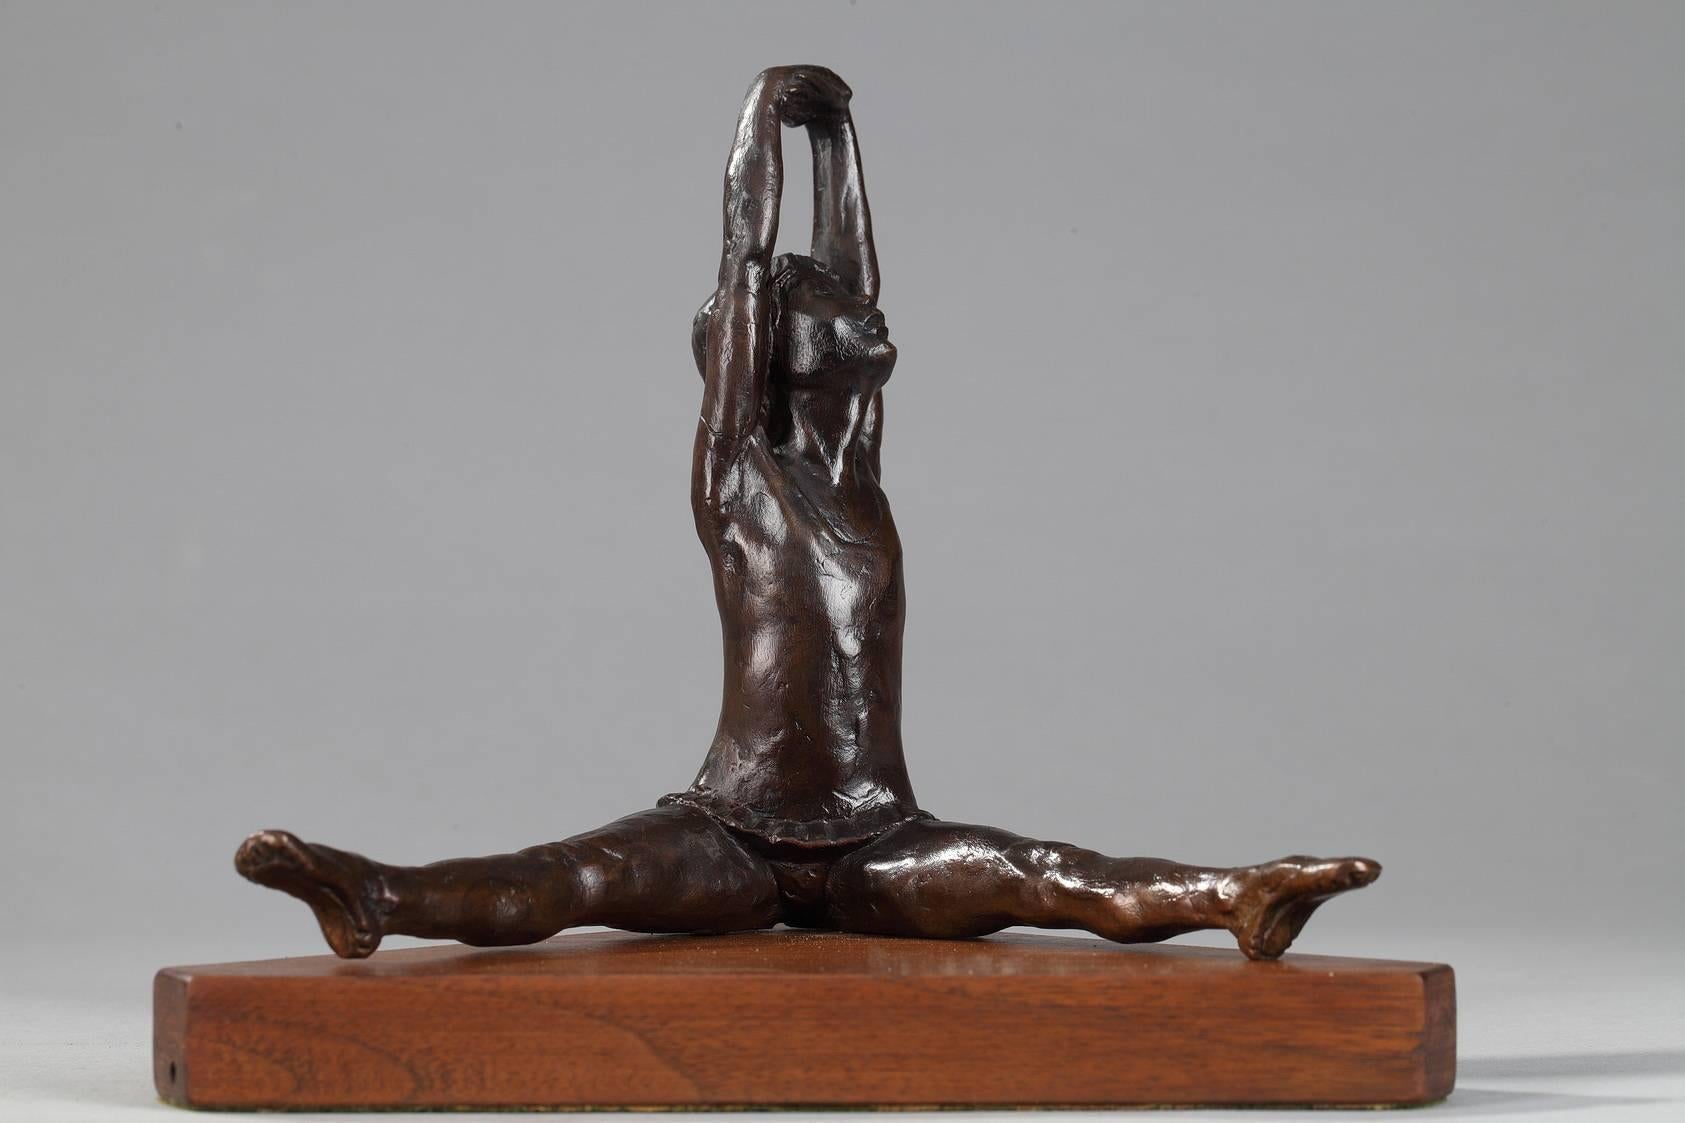 Royal Copenhagen S.G. Kelsey patinated bronze ballet dancer resting on a triangular wood base. Signed on the hip: SGK. 


circa 1975
Dimensions: W: 7.9 in, D: 5.9in - H: 6.9in.
Dimensions: L: 20cm, P: 15cm, H: 17.5cm.